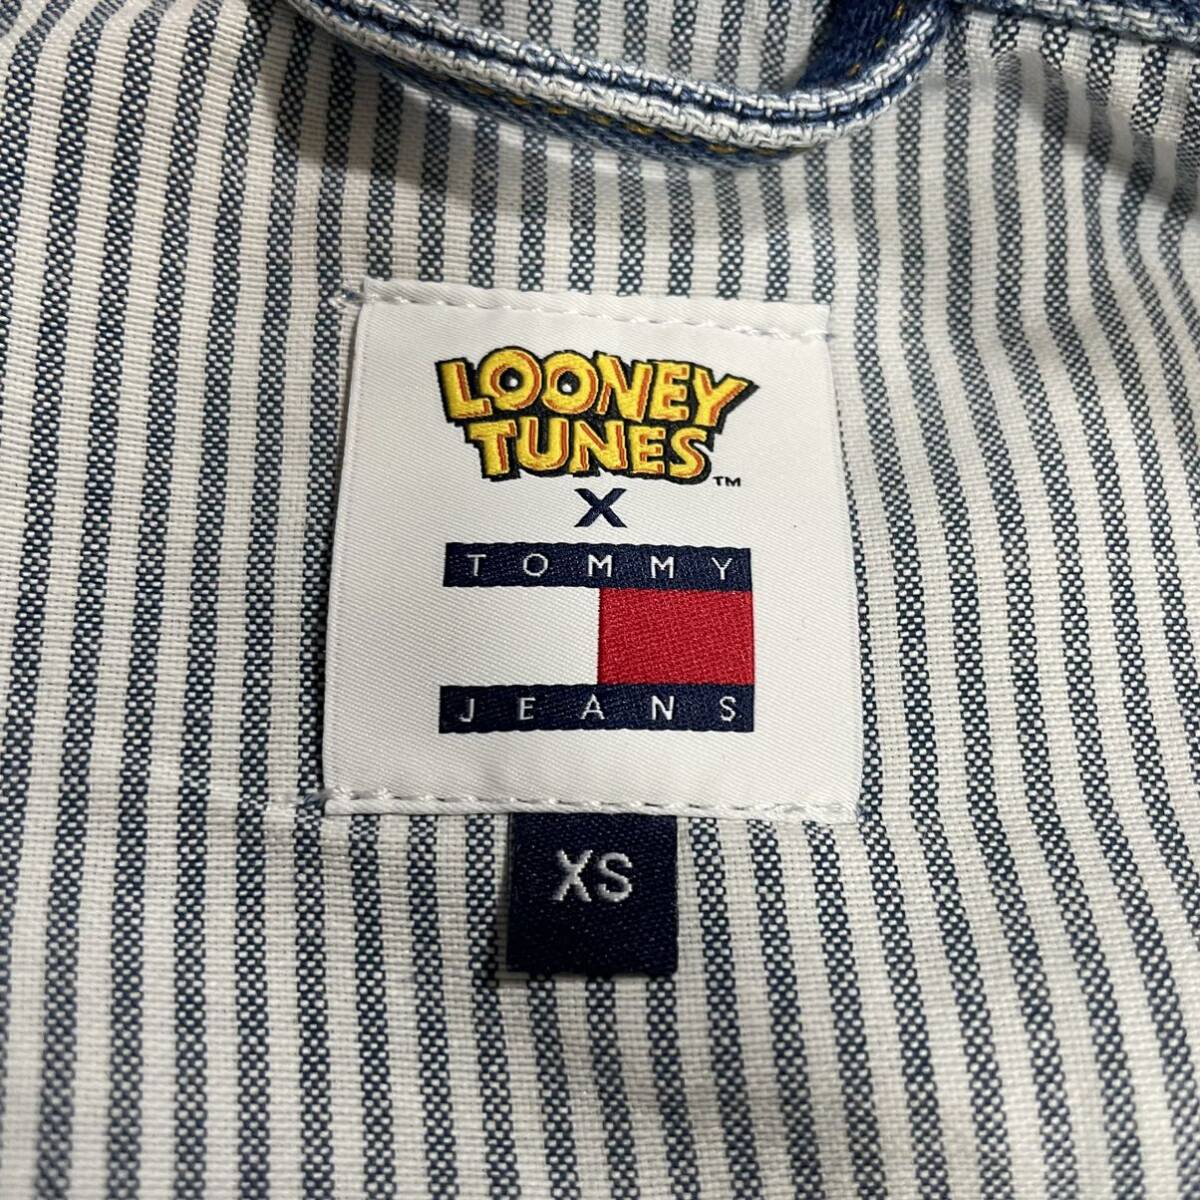 TOMMY JEANS トミー トミージーンズ LOONY TUNES ルーニー・テューンズ